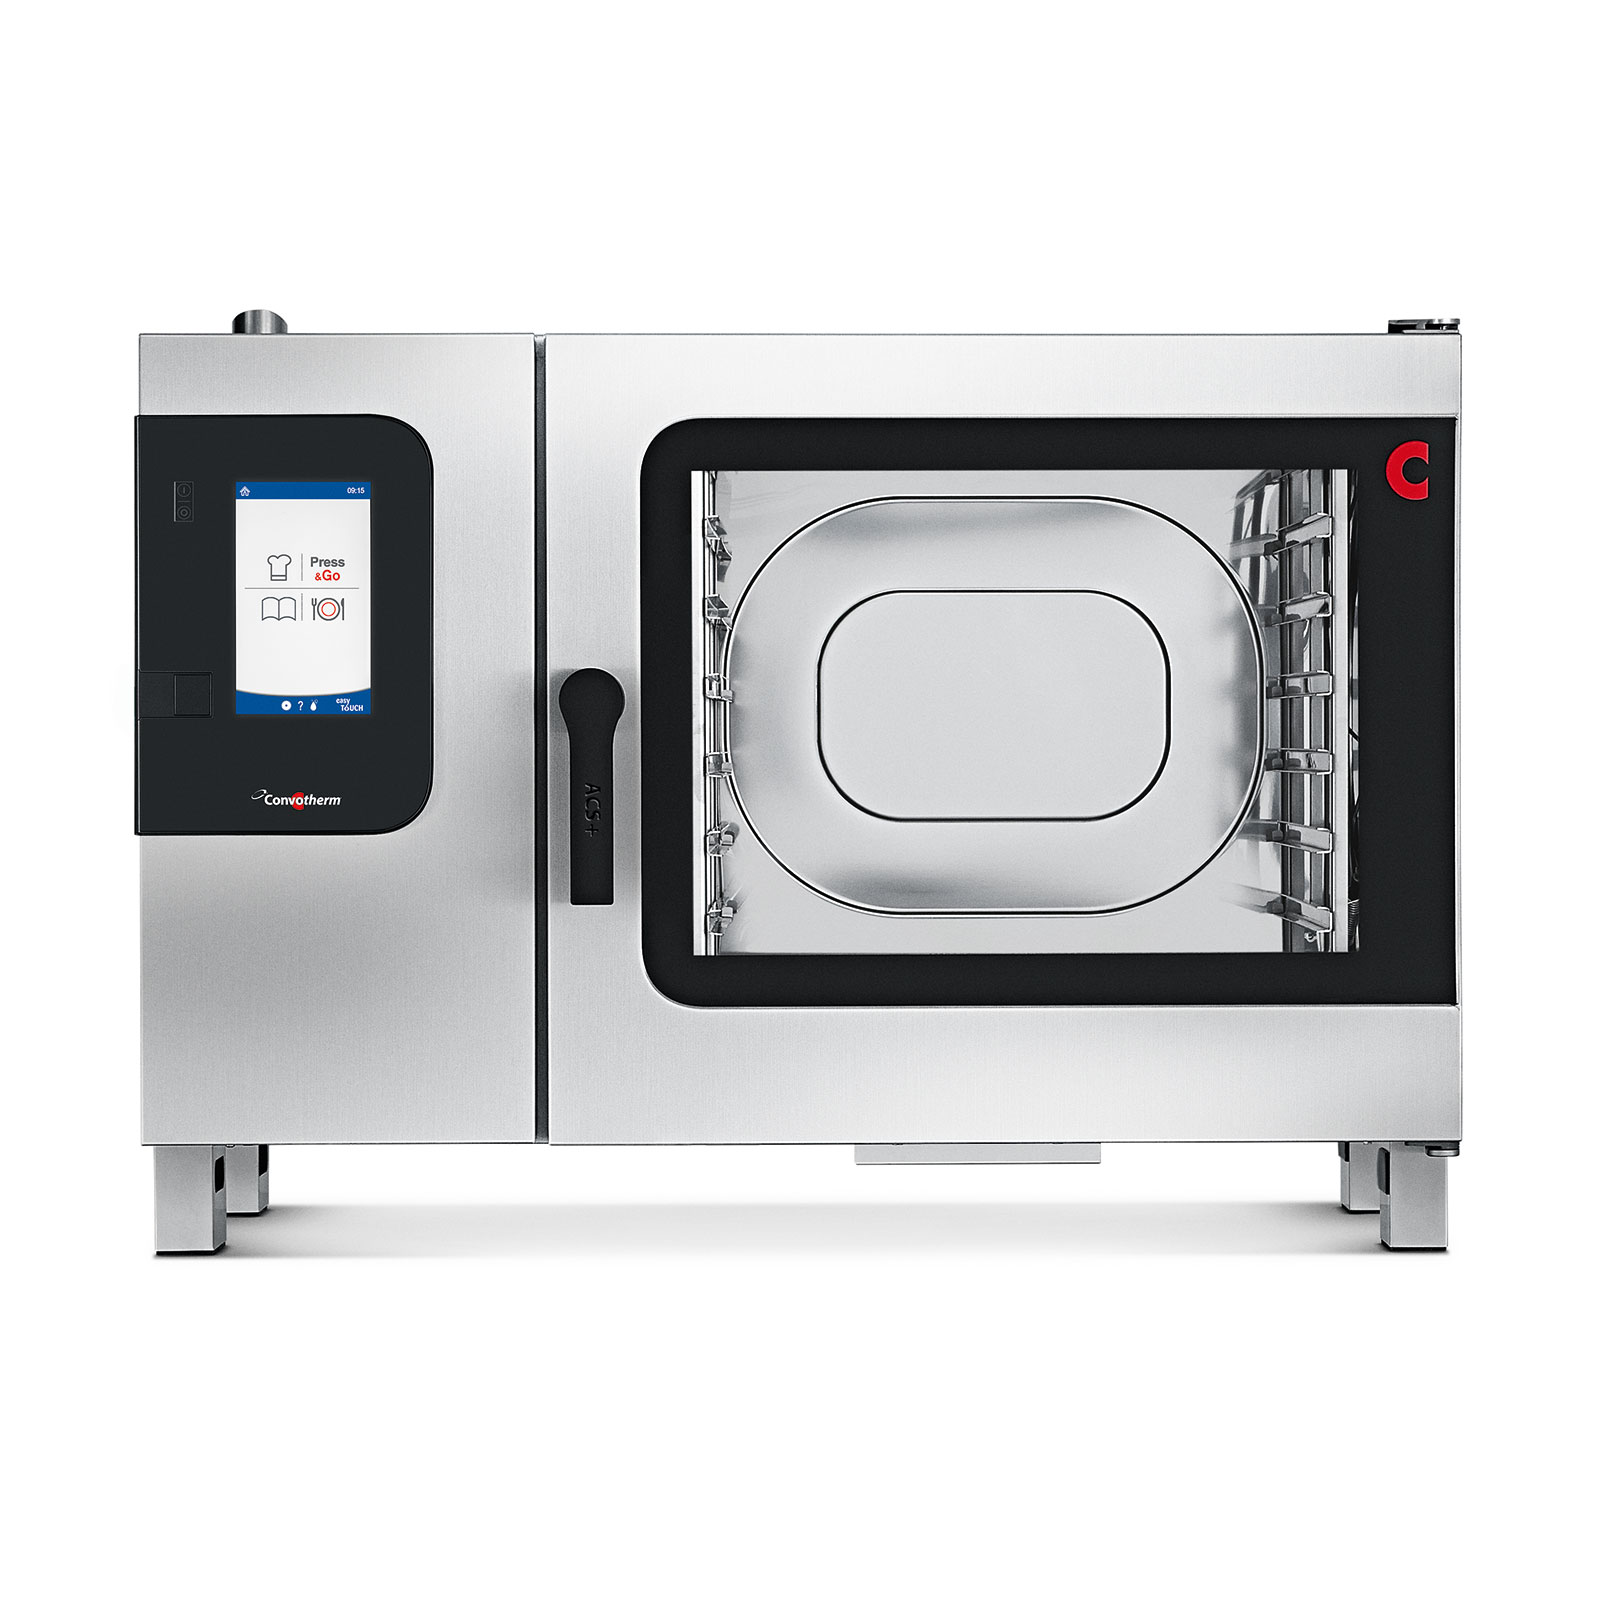 Convotherm C4ET6.20EB DD SMK Full-Size Electric Combi Oven w/ Programmable Controls, Steam Generator